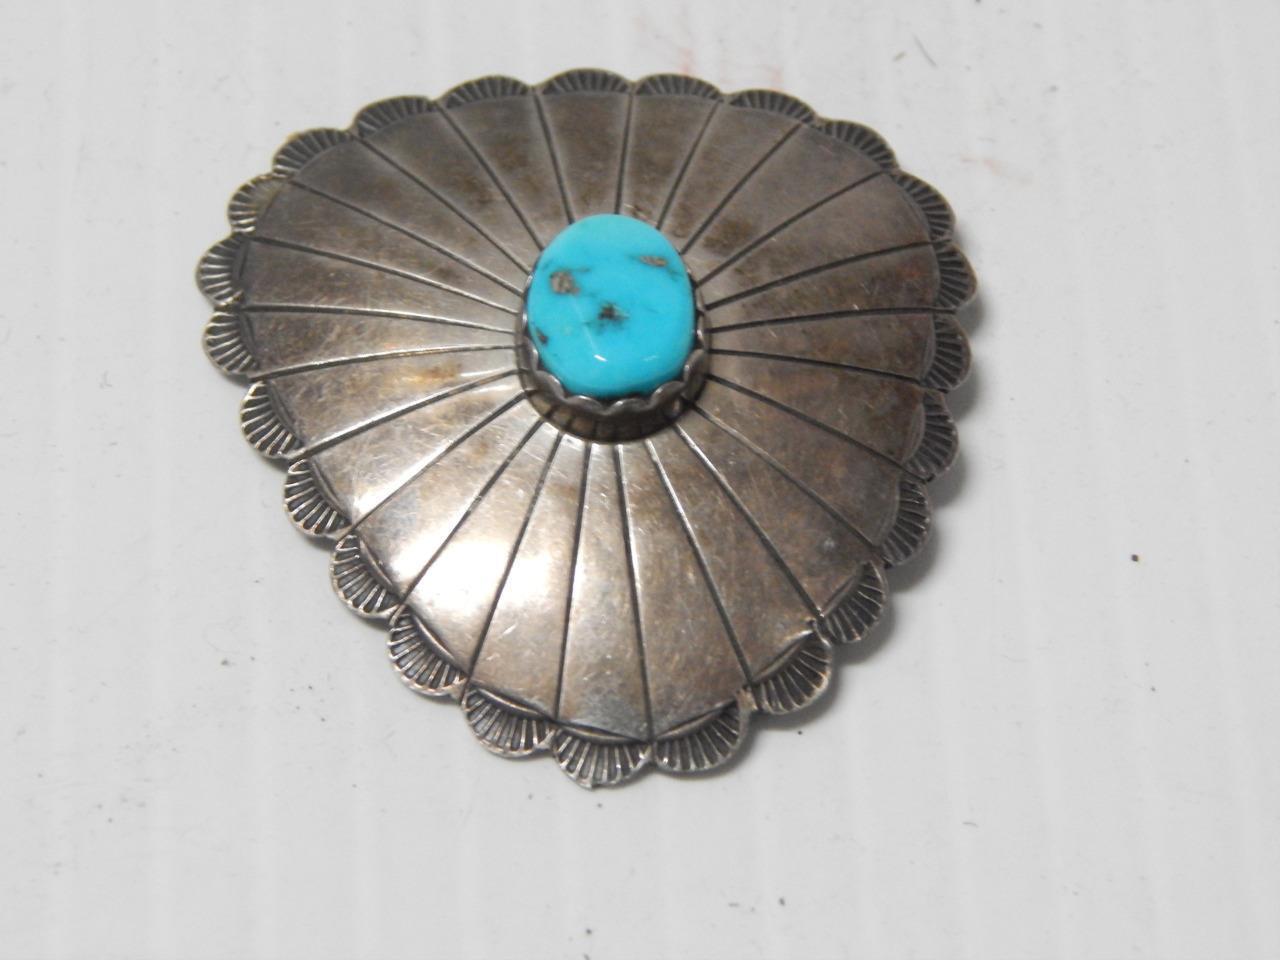 VINTAGE NAVAJO INDIAN STERLING SILVER TURQUOISE HAND STAMPED PIN - BTFL  STONE